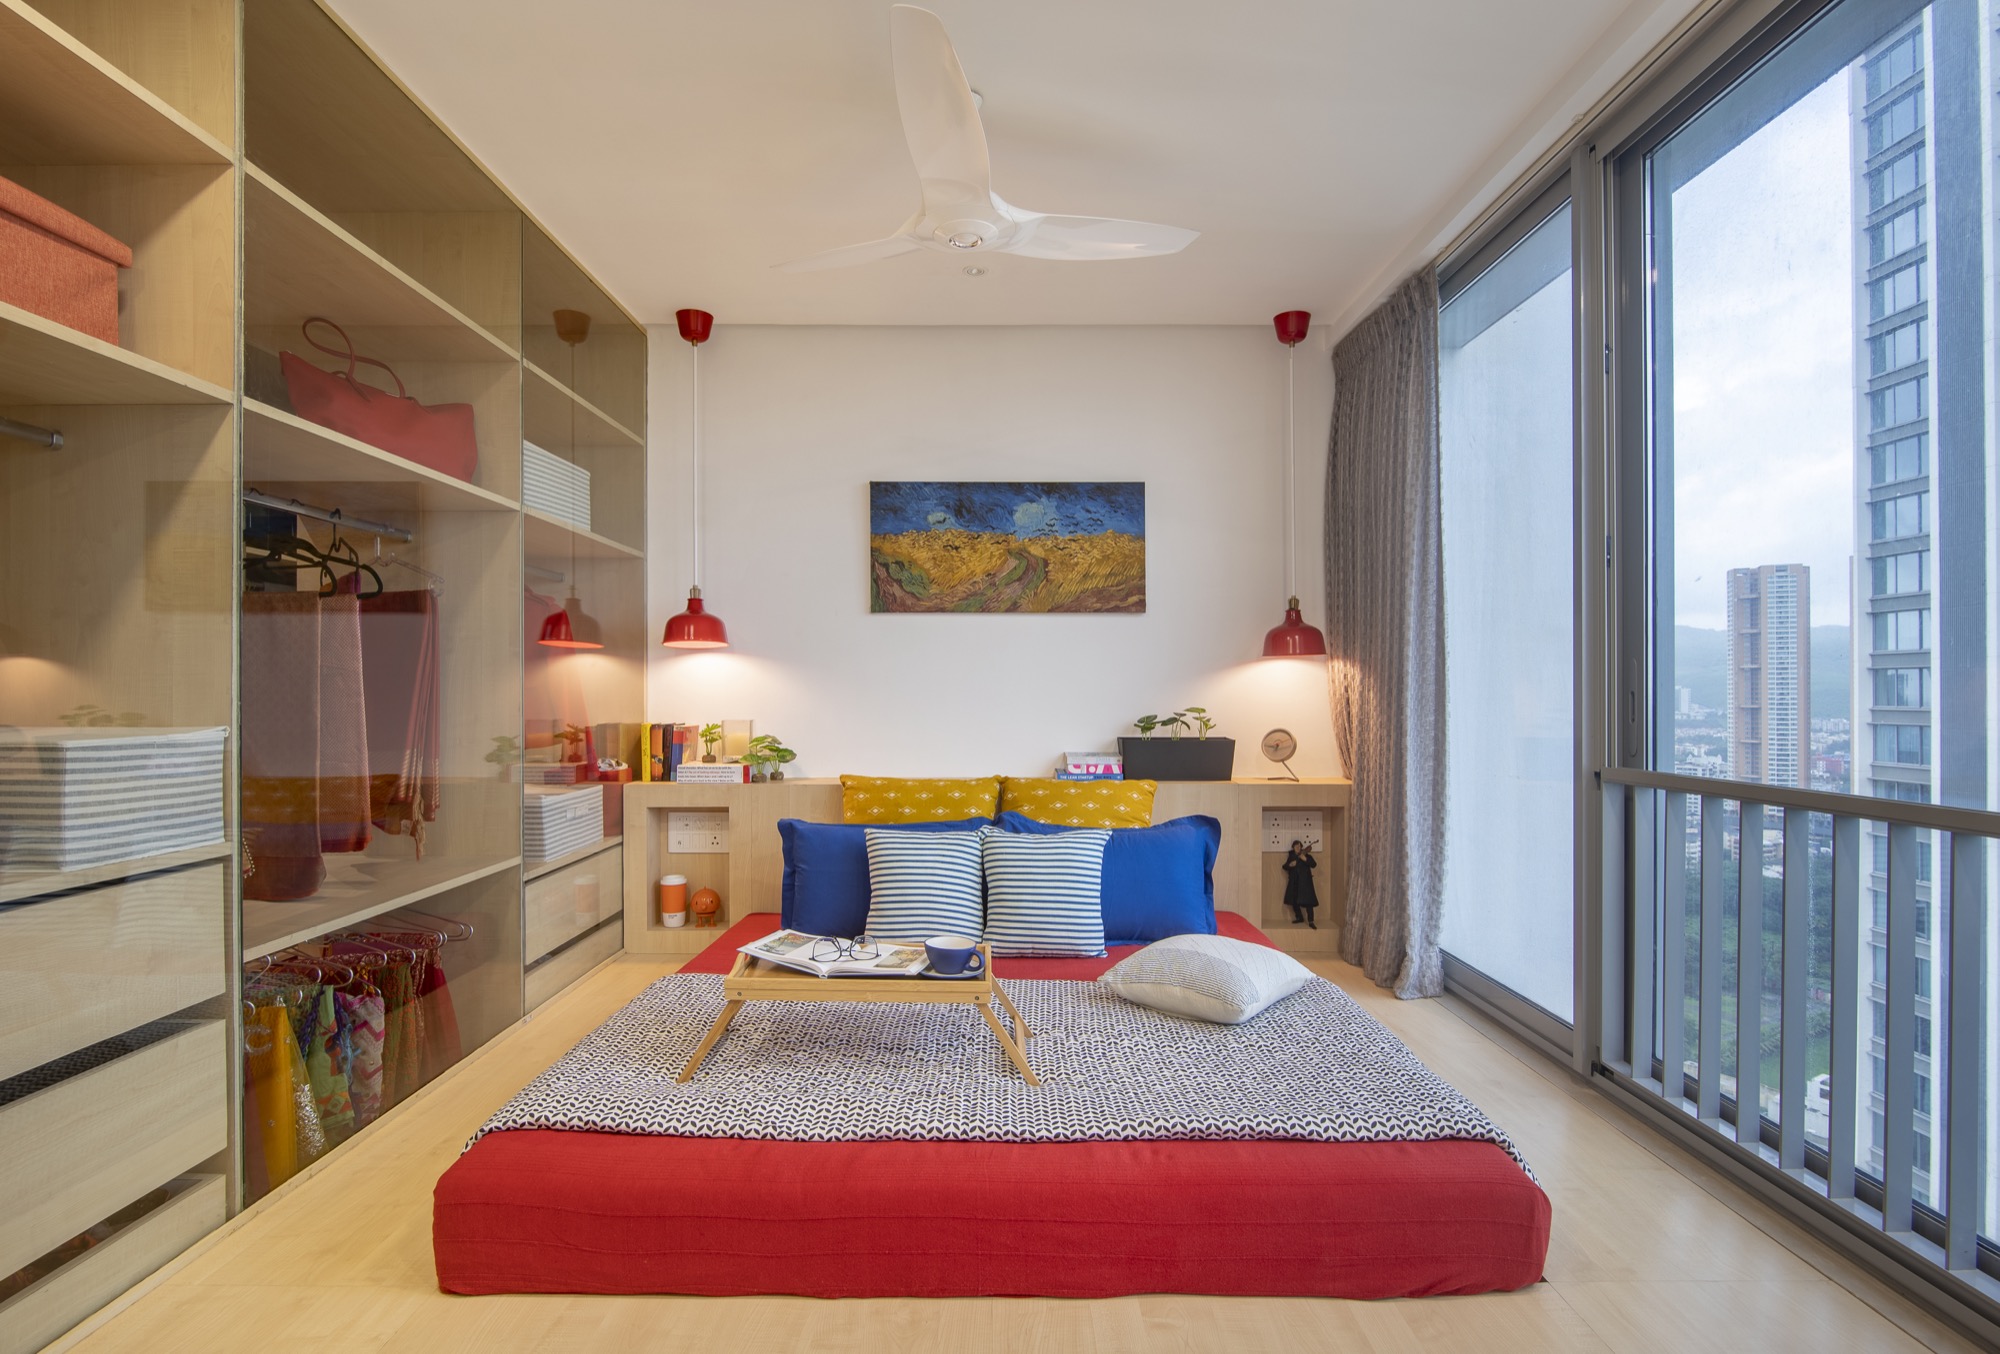 ESQUIRE: Interior Design for a residential Apartment at Mumbai, by Limehouse Design Studio 2